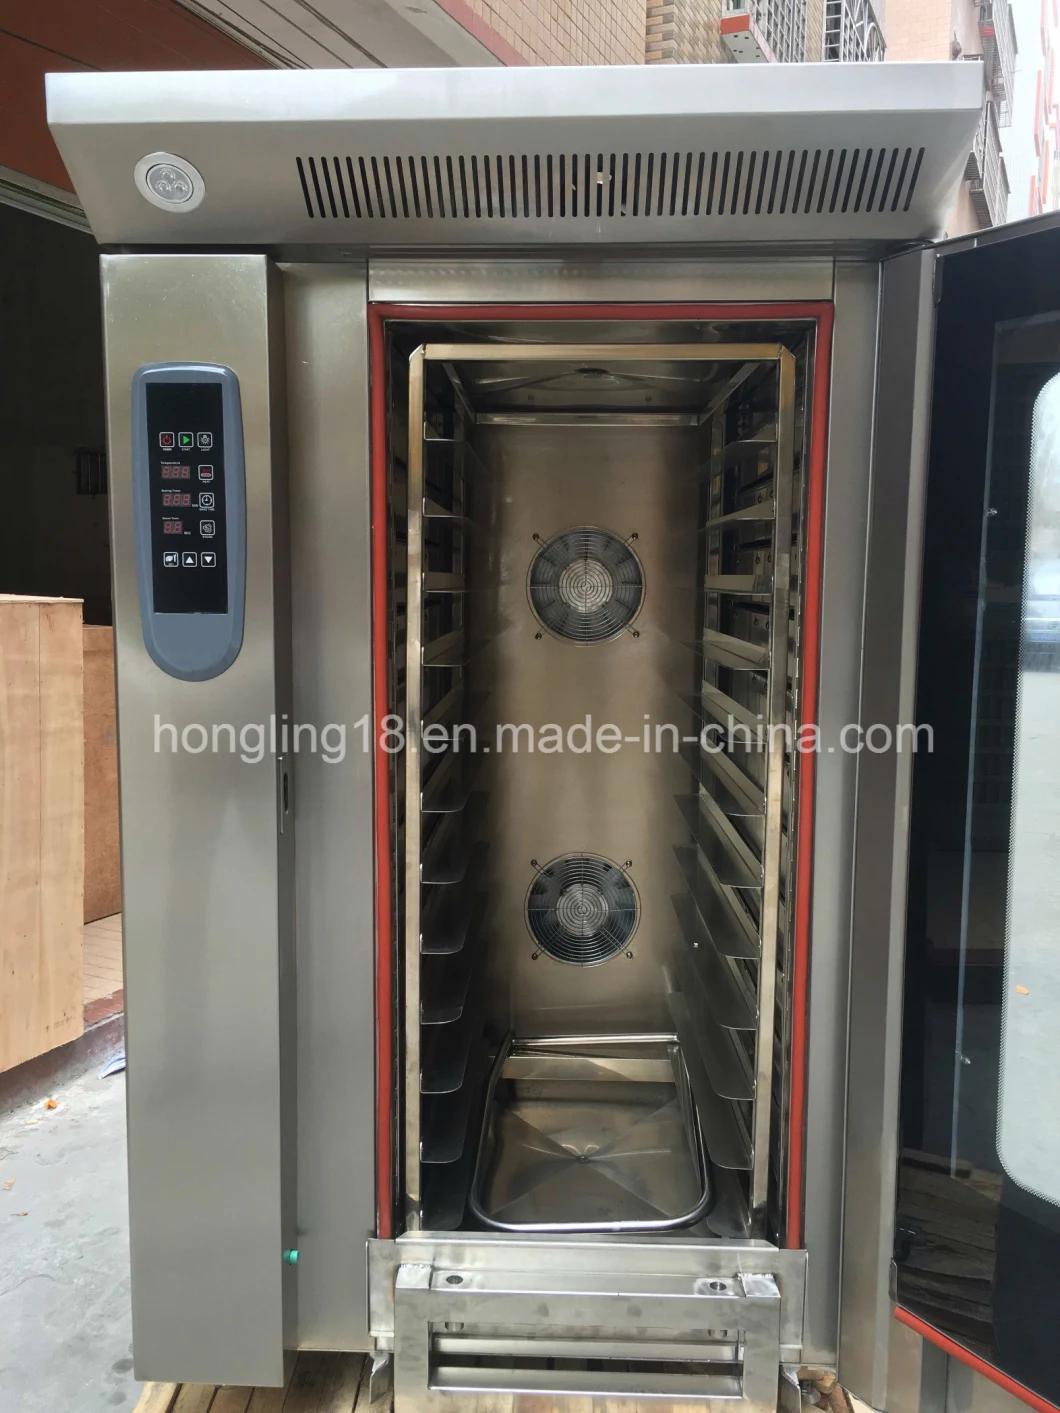 Bakery Equipment 12-Tray Gas Convection Oven From Real Factory